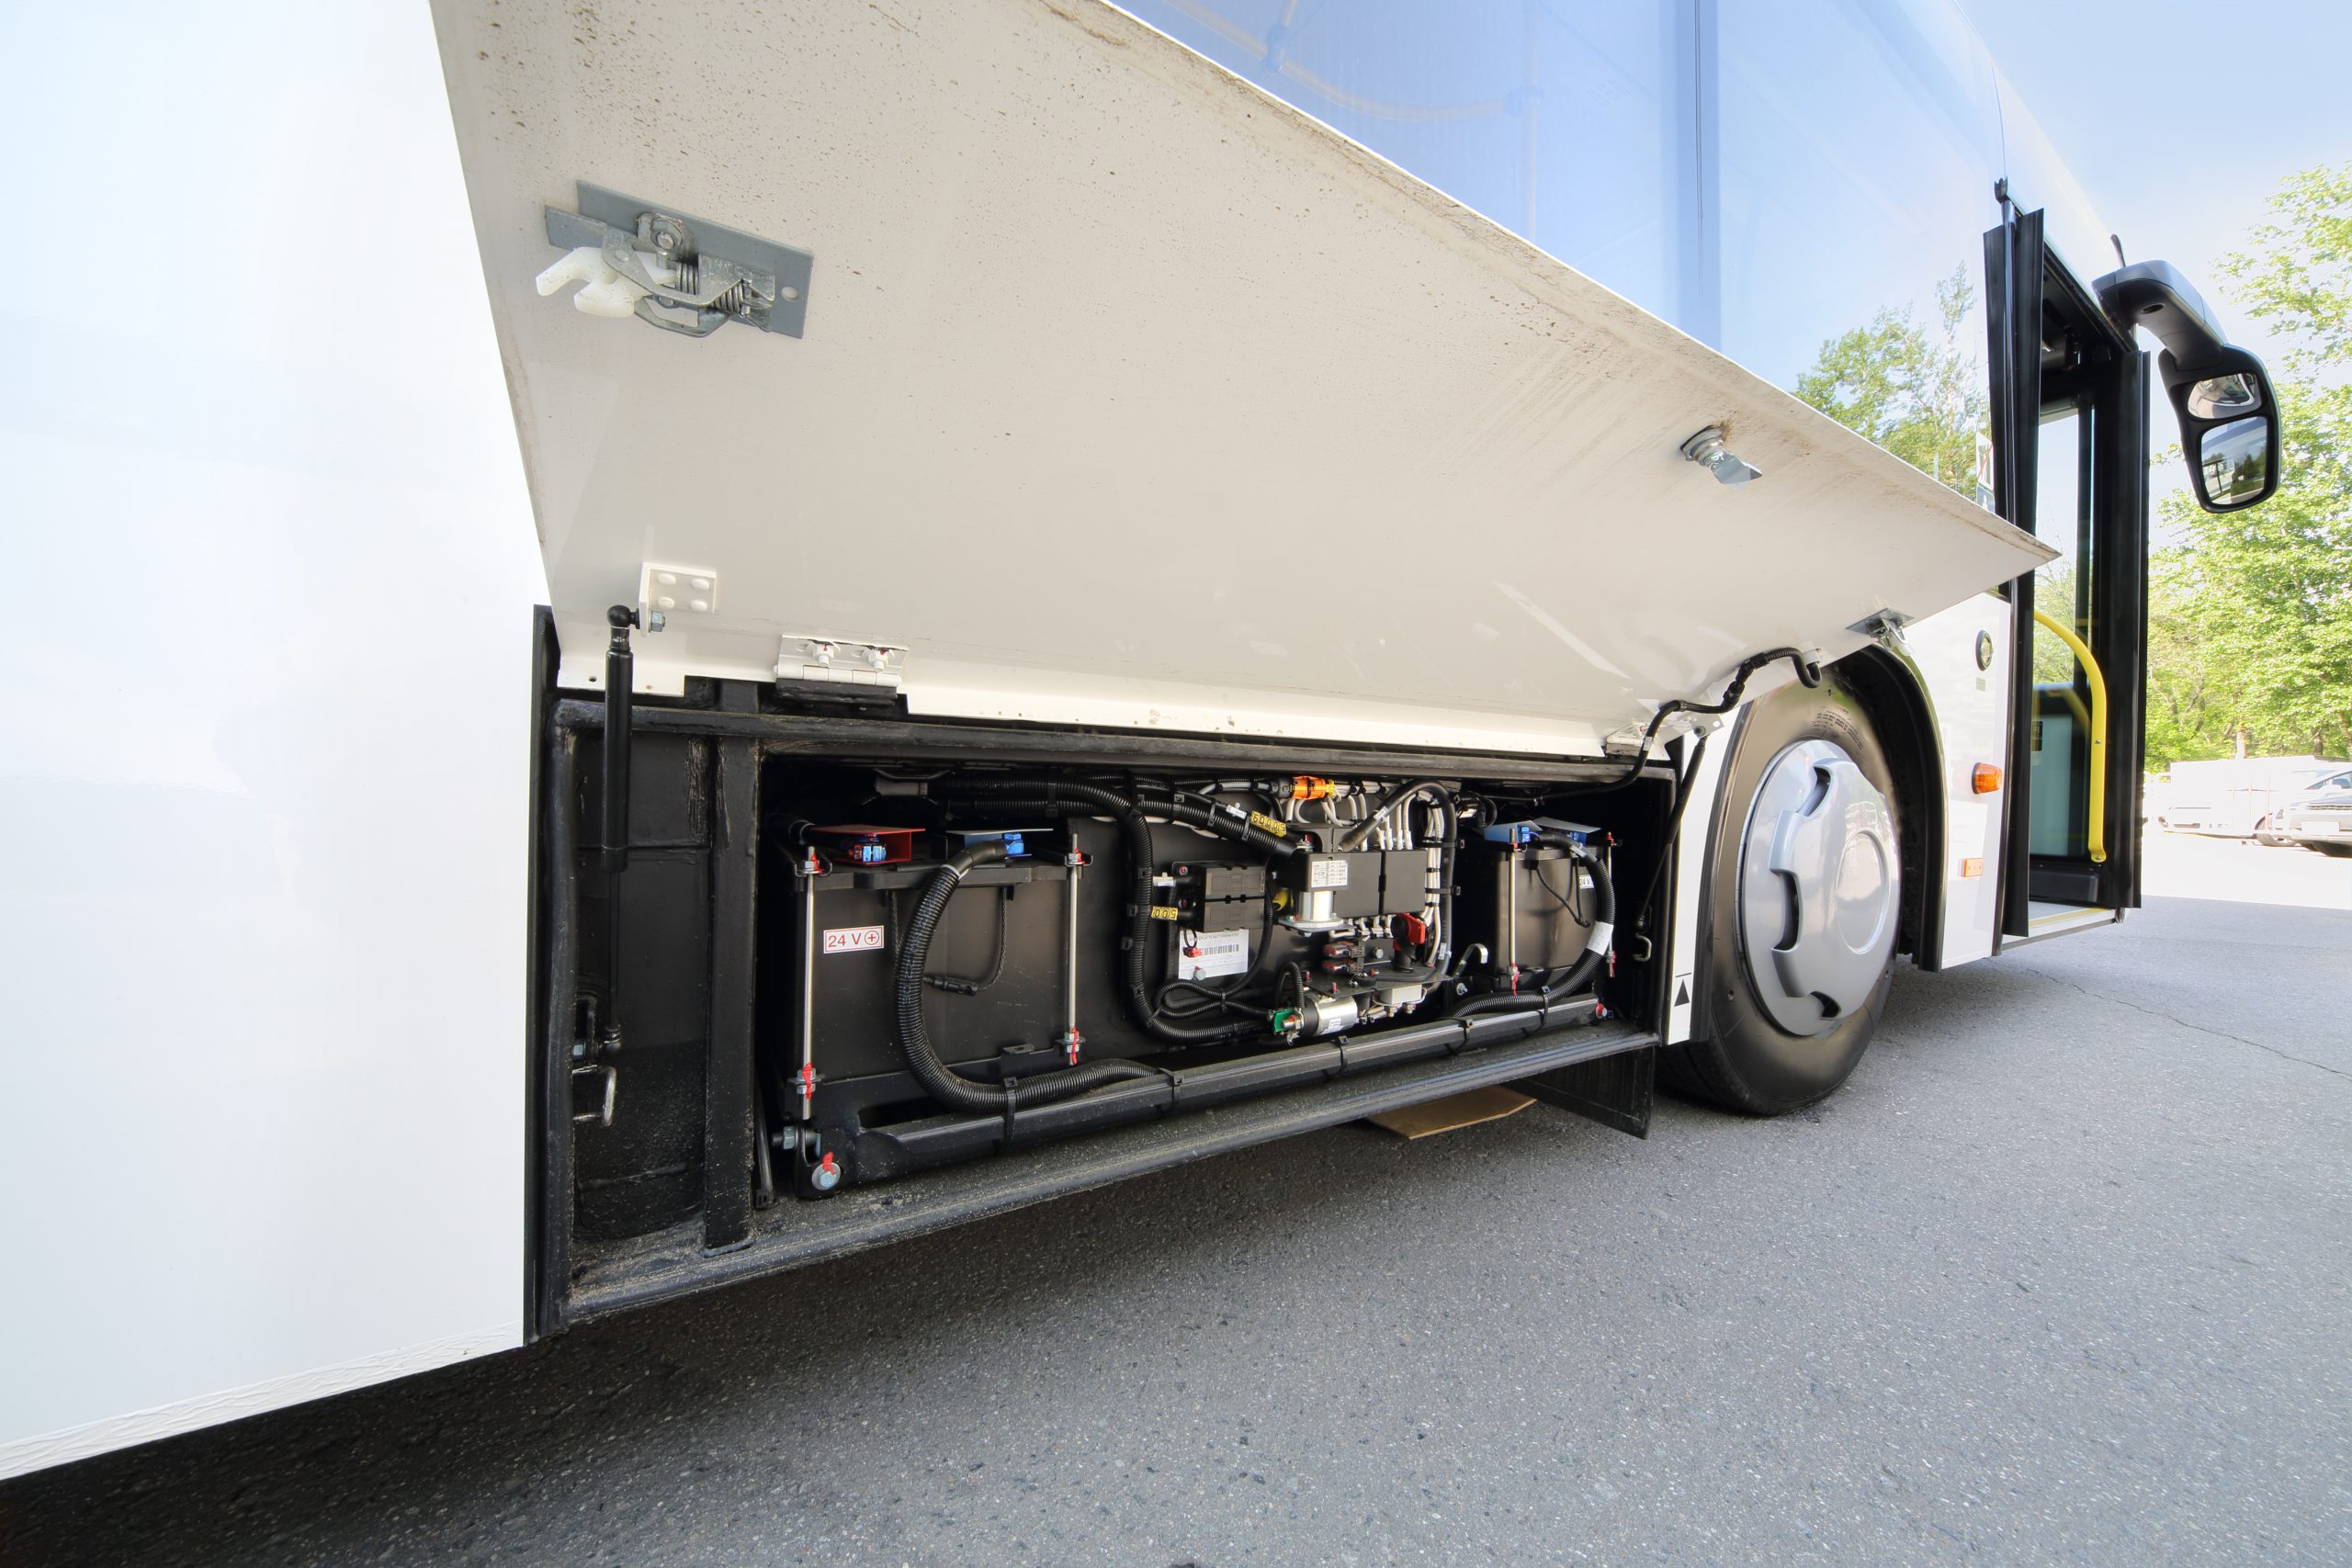 Demonstrating Zero Emission HGVs: battery and hydrogen fuel cell trucks outputs from the Zero Emission Road Freight programme